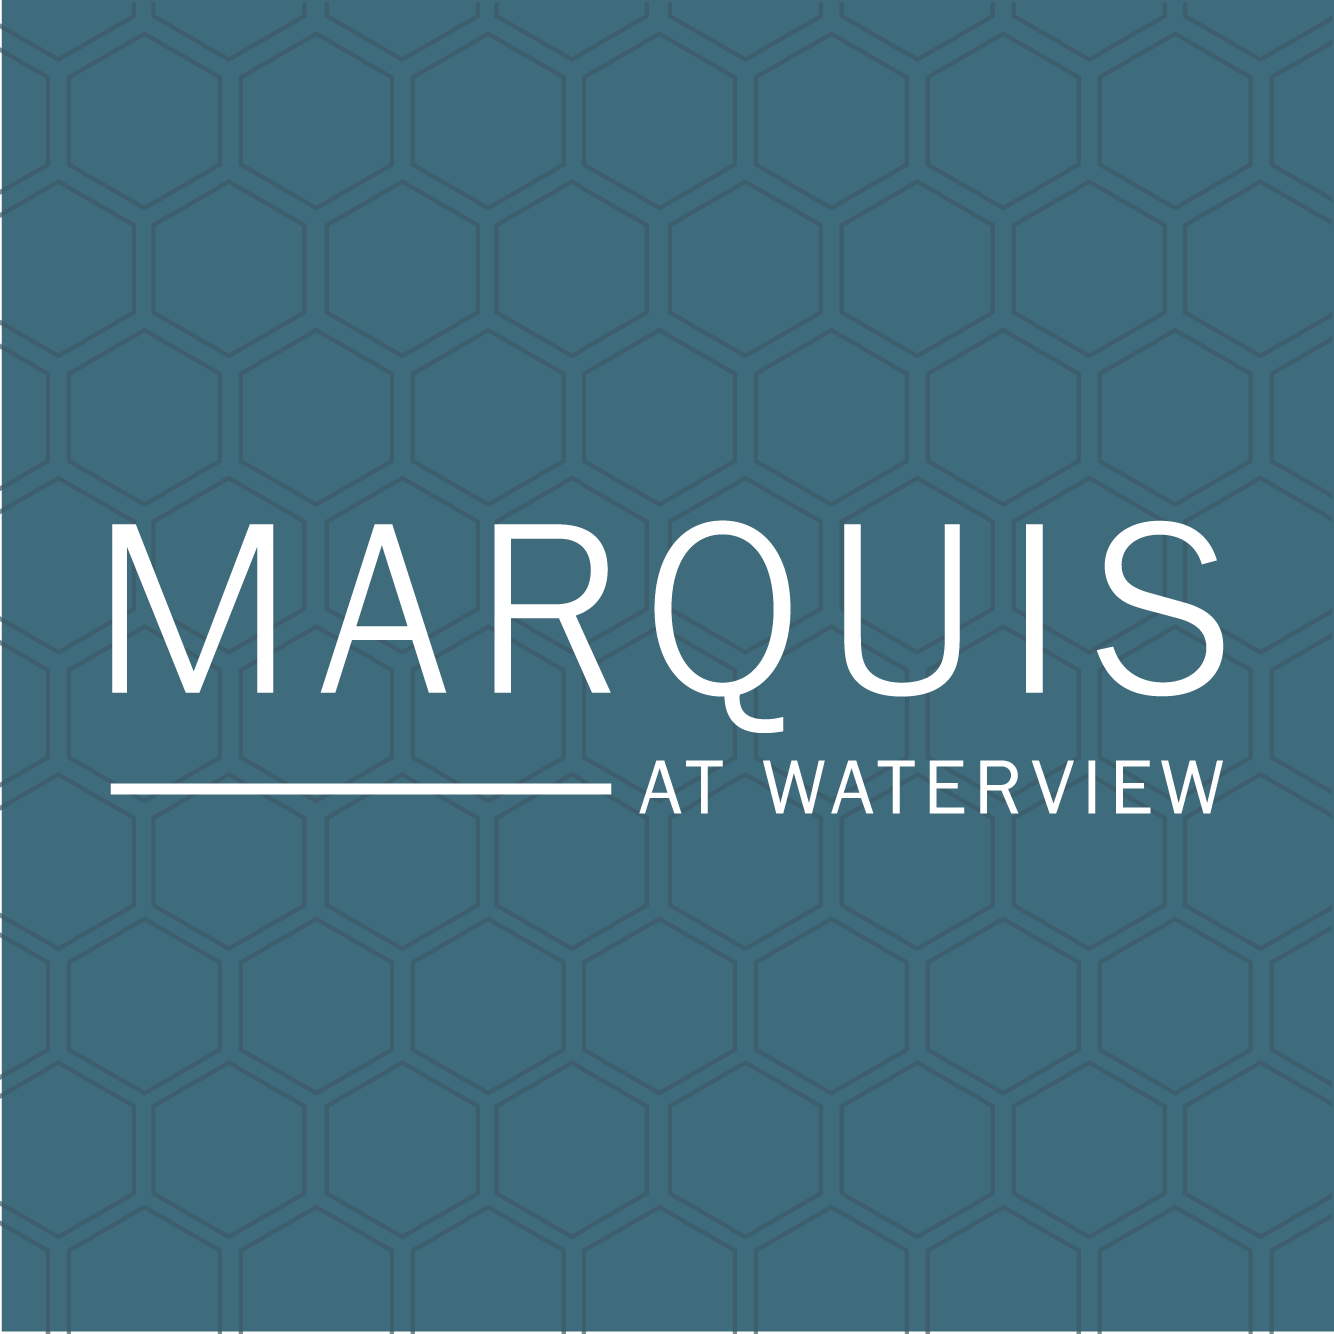 Business logo of Marquis at Waterview